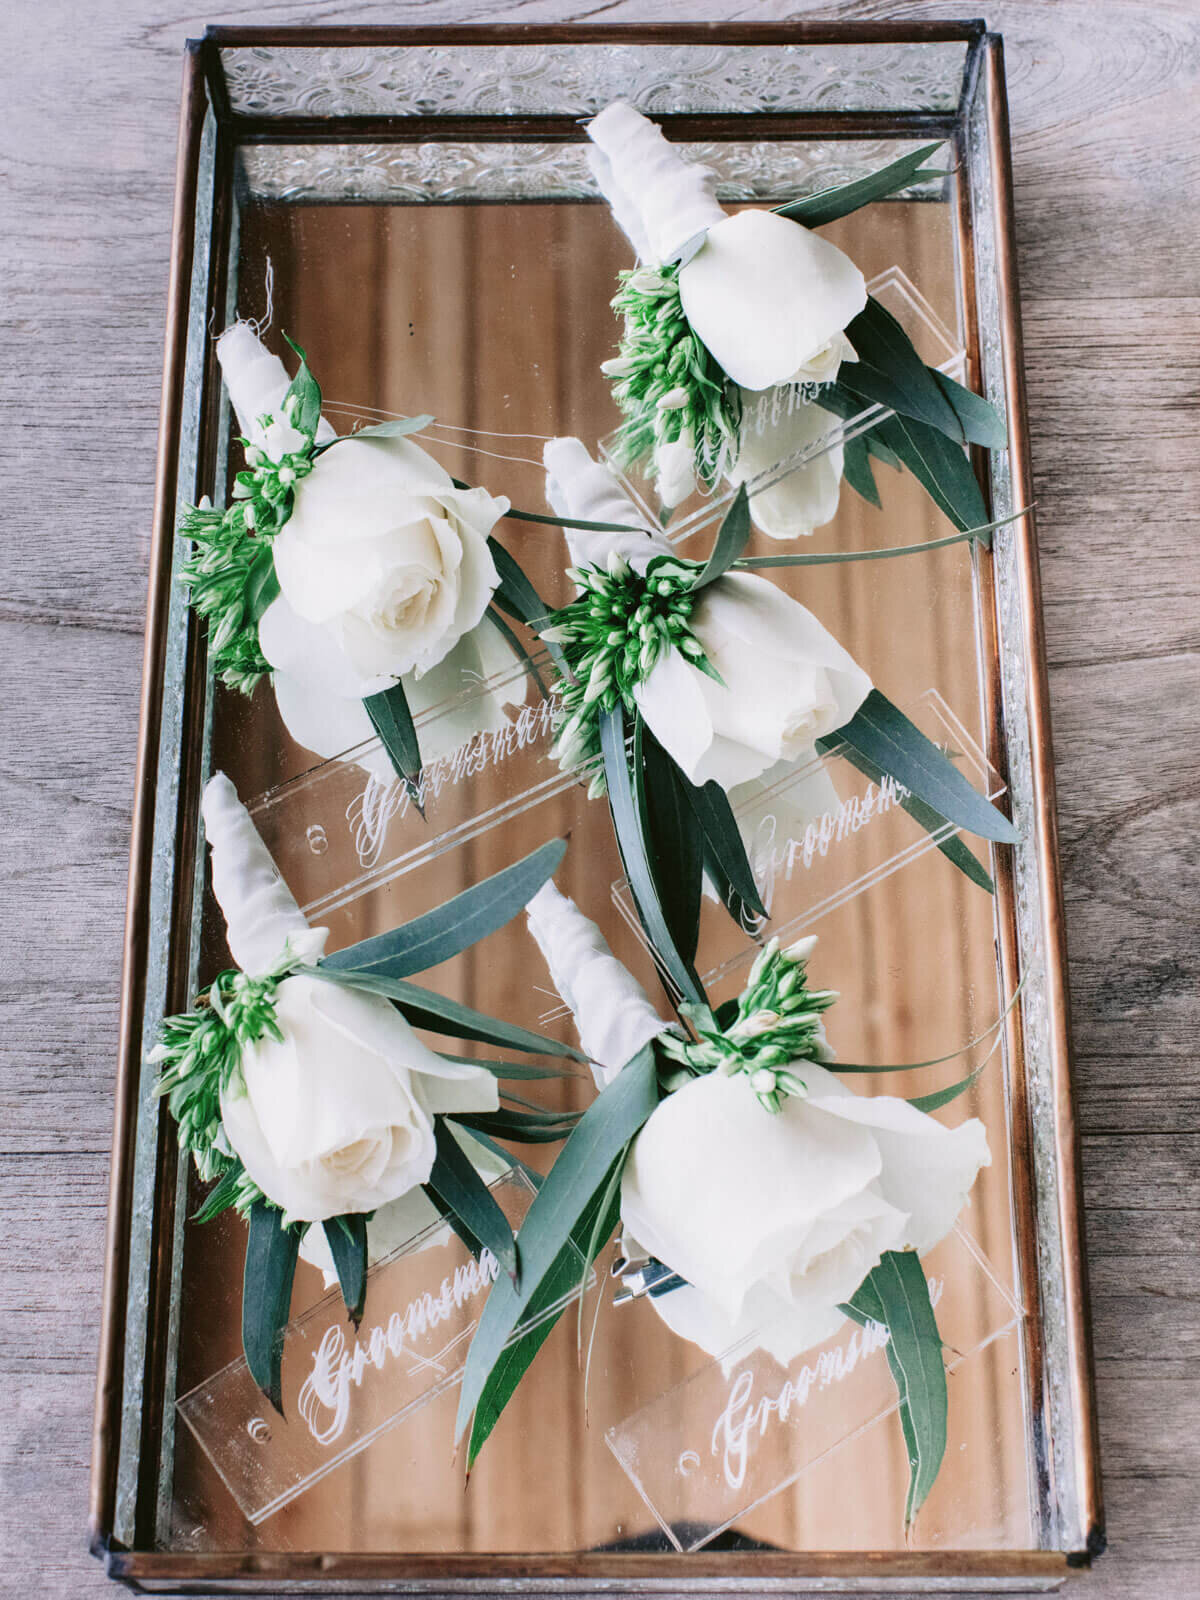 Five white flower boutonnieres with name labels on a tray for a wedding in Khayangan Estate, Indonesia. Image by Jenny Fu Studio